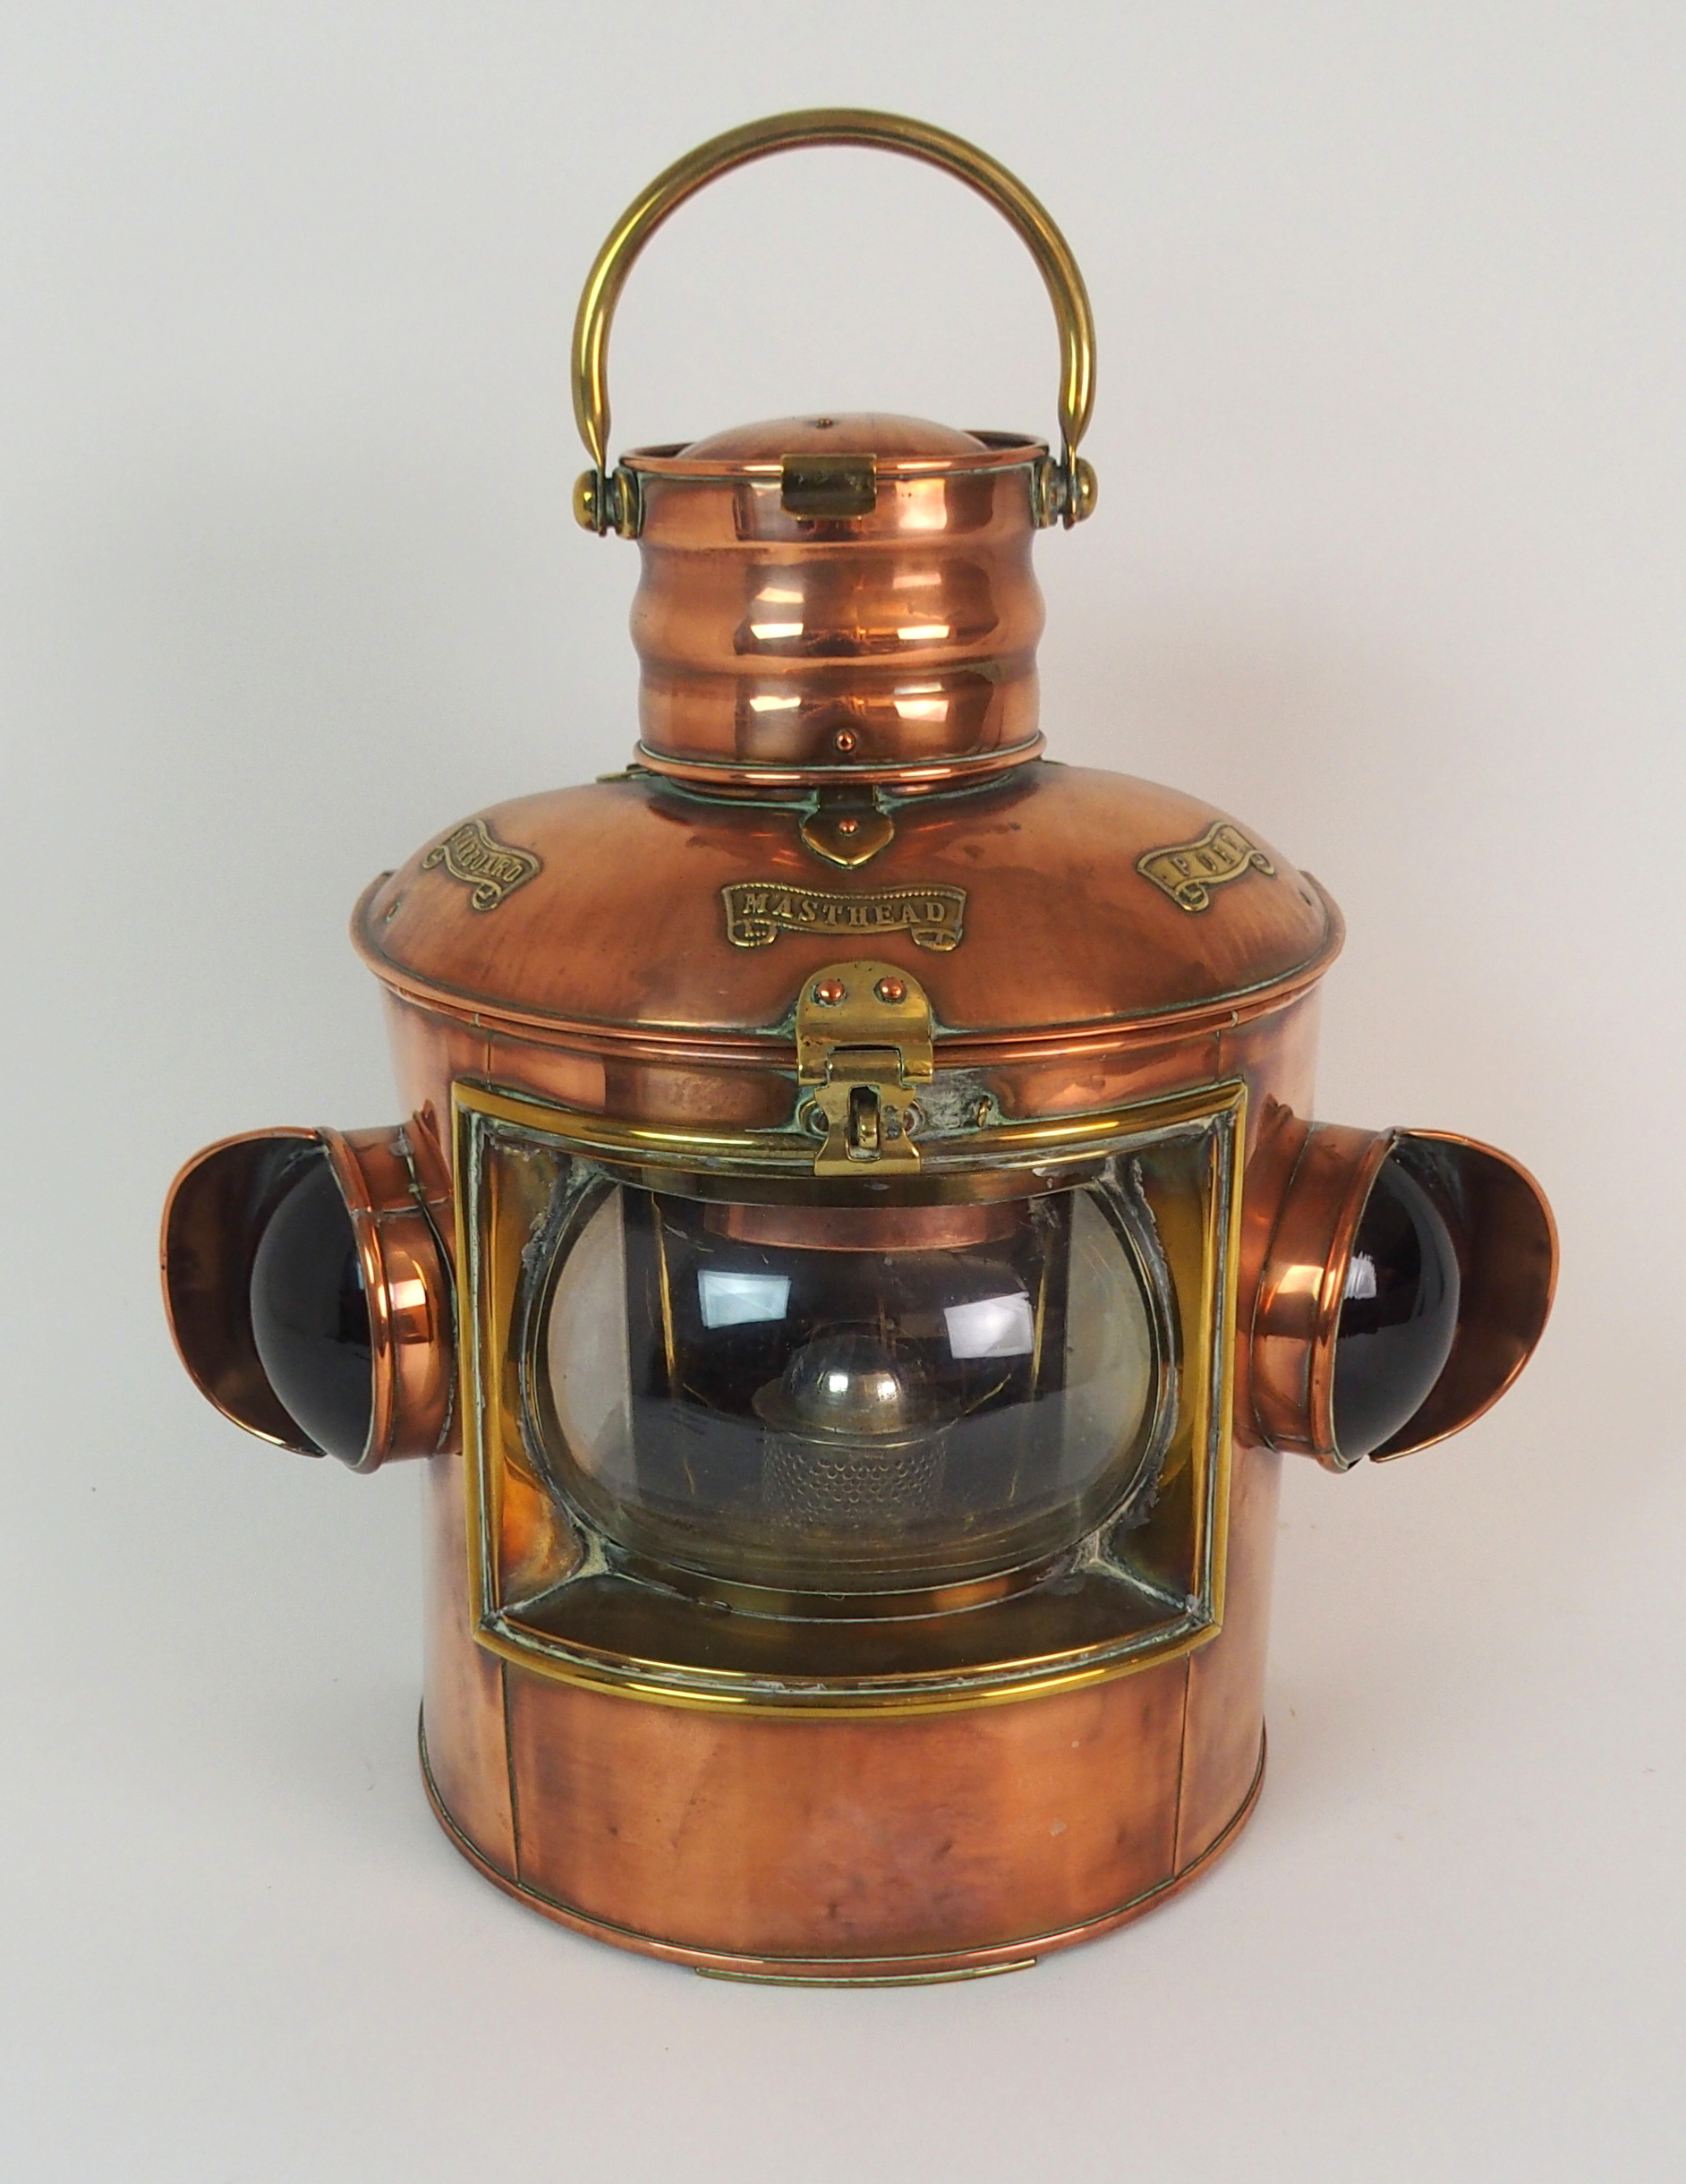 A VICTORIAN COPPER PORT & STARBOARD SHIPS LANTERN with hinged top and swing handle, with interior